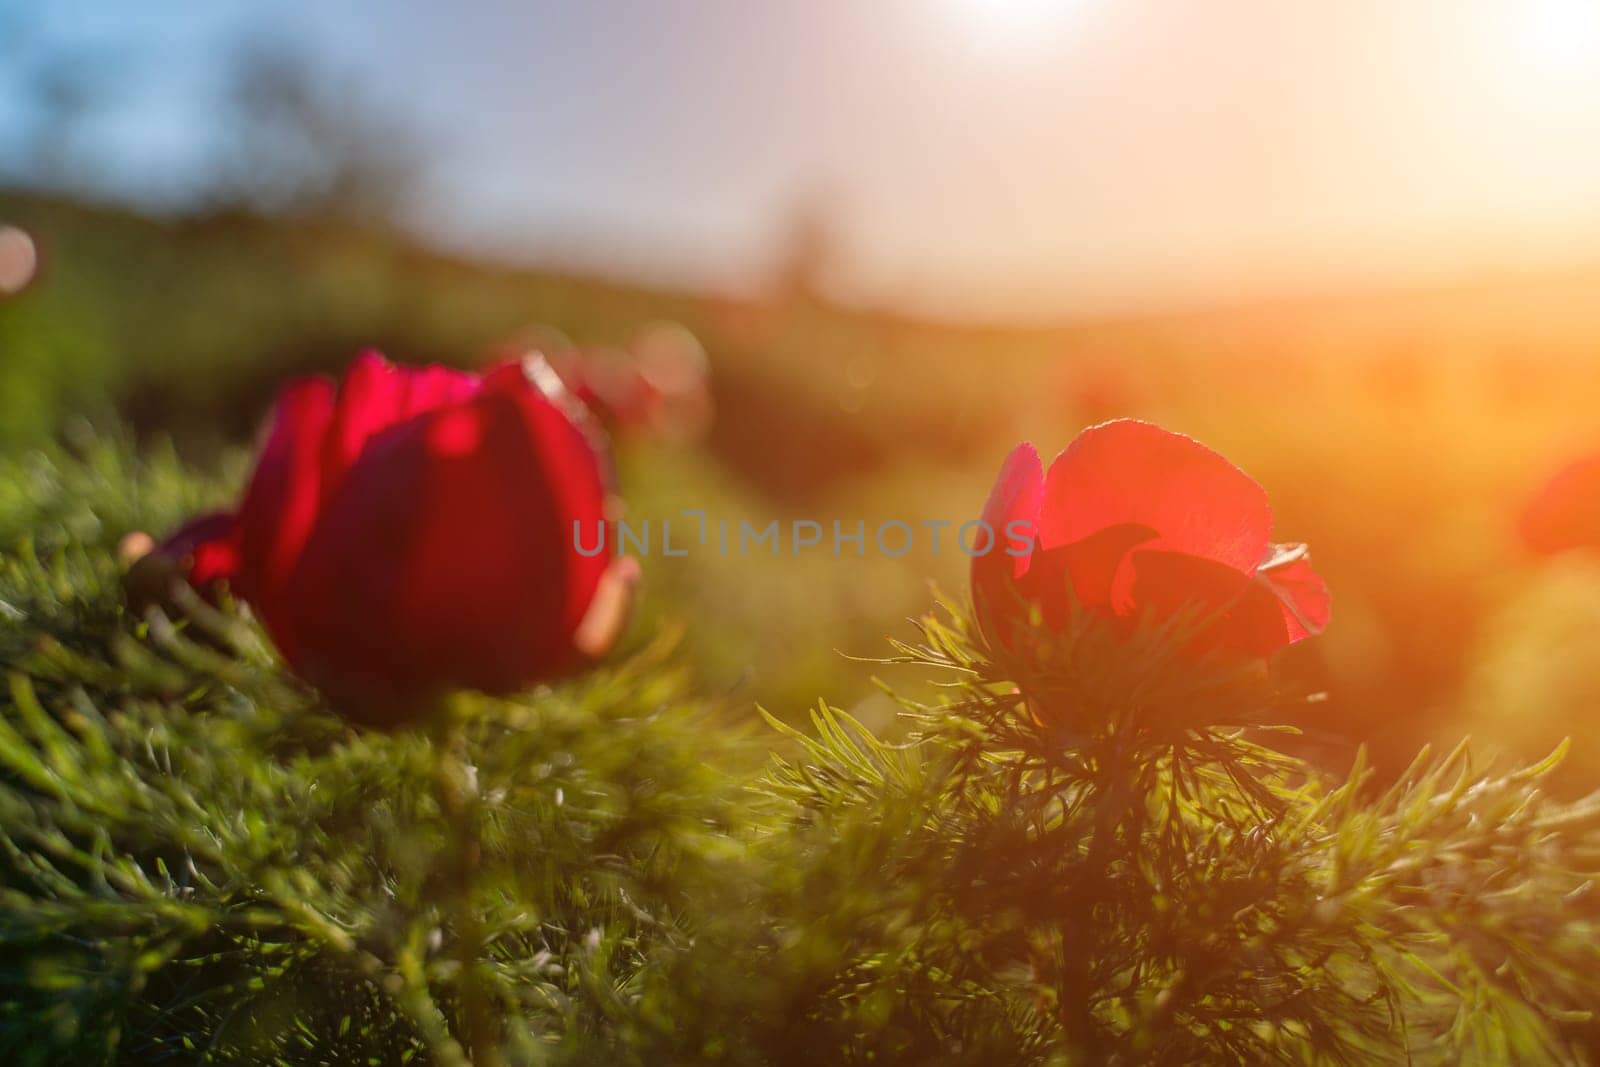 Wild peony is thin leaved Paeonia tenuifolia, in its natural environment against the sunset. Bright decorative flower, popular in garden landscape design selective focus.